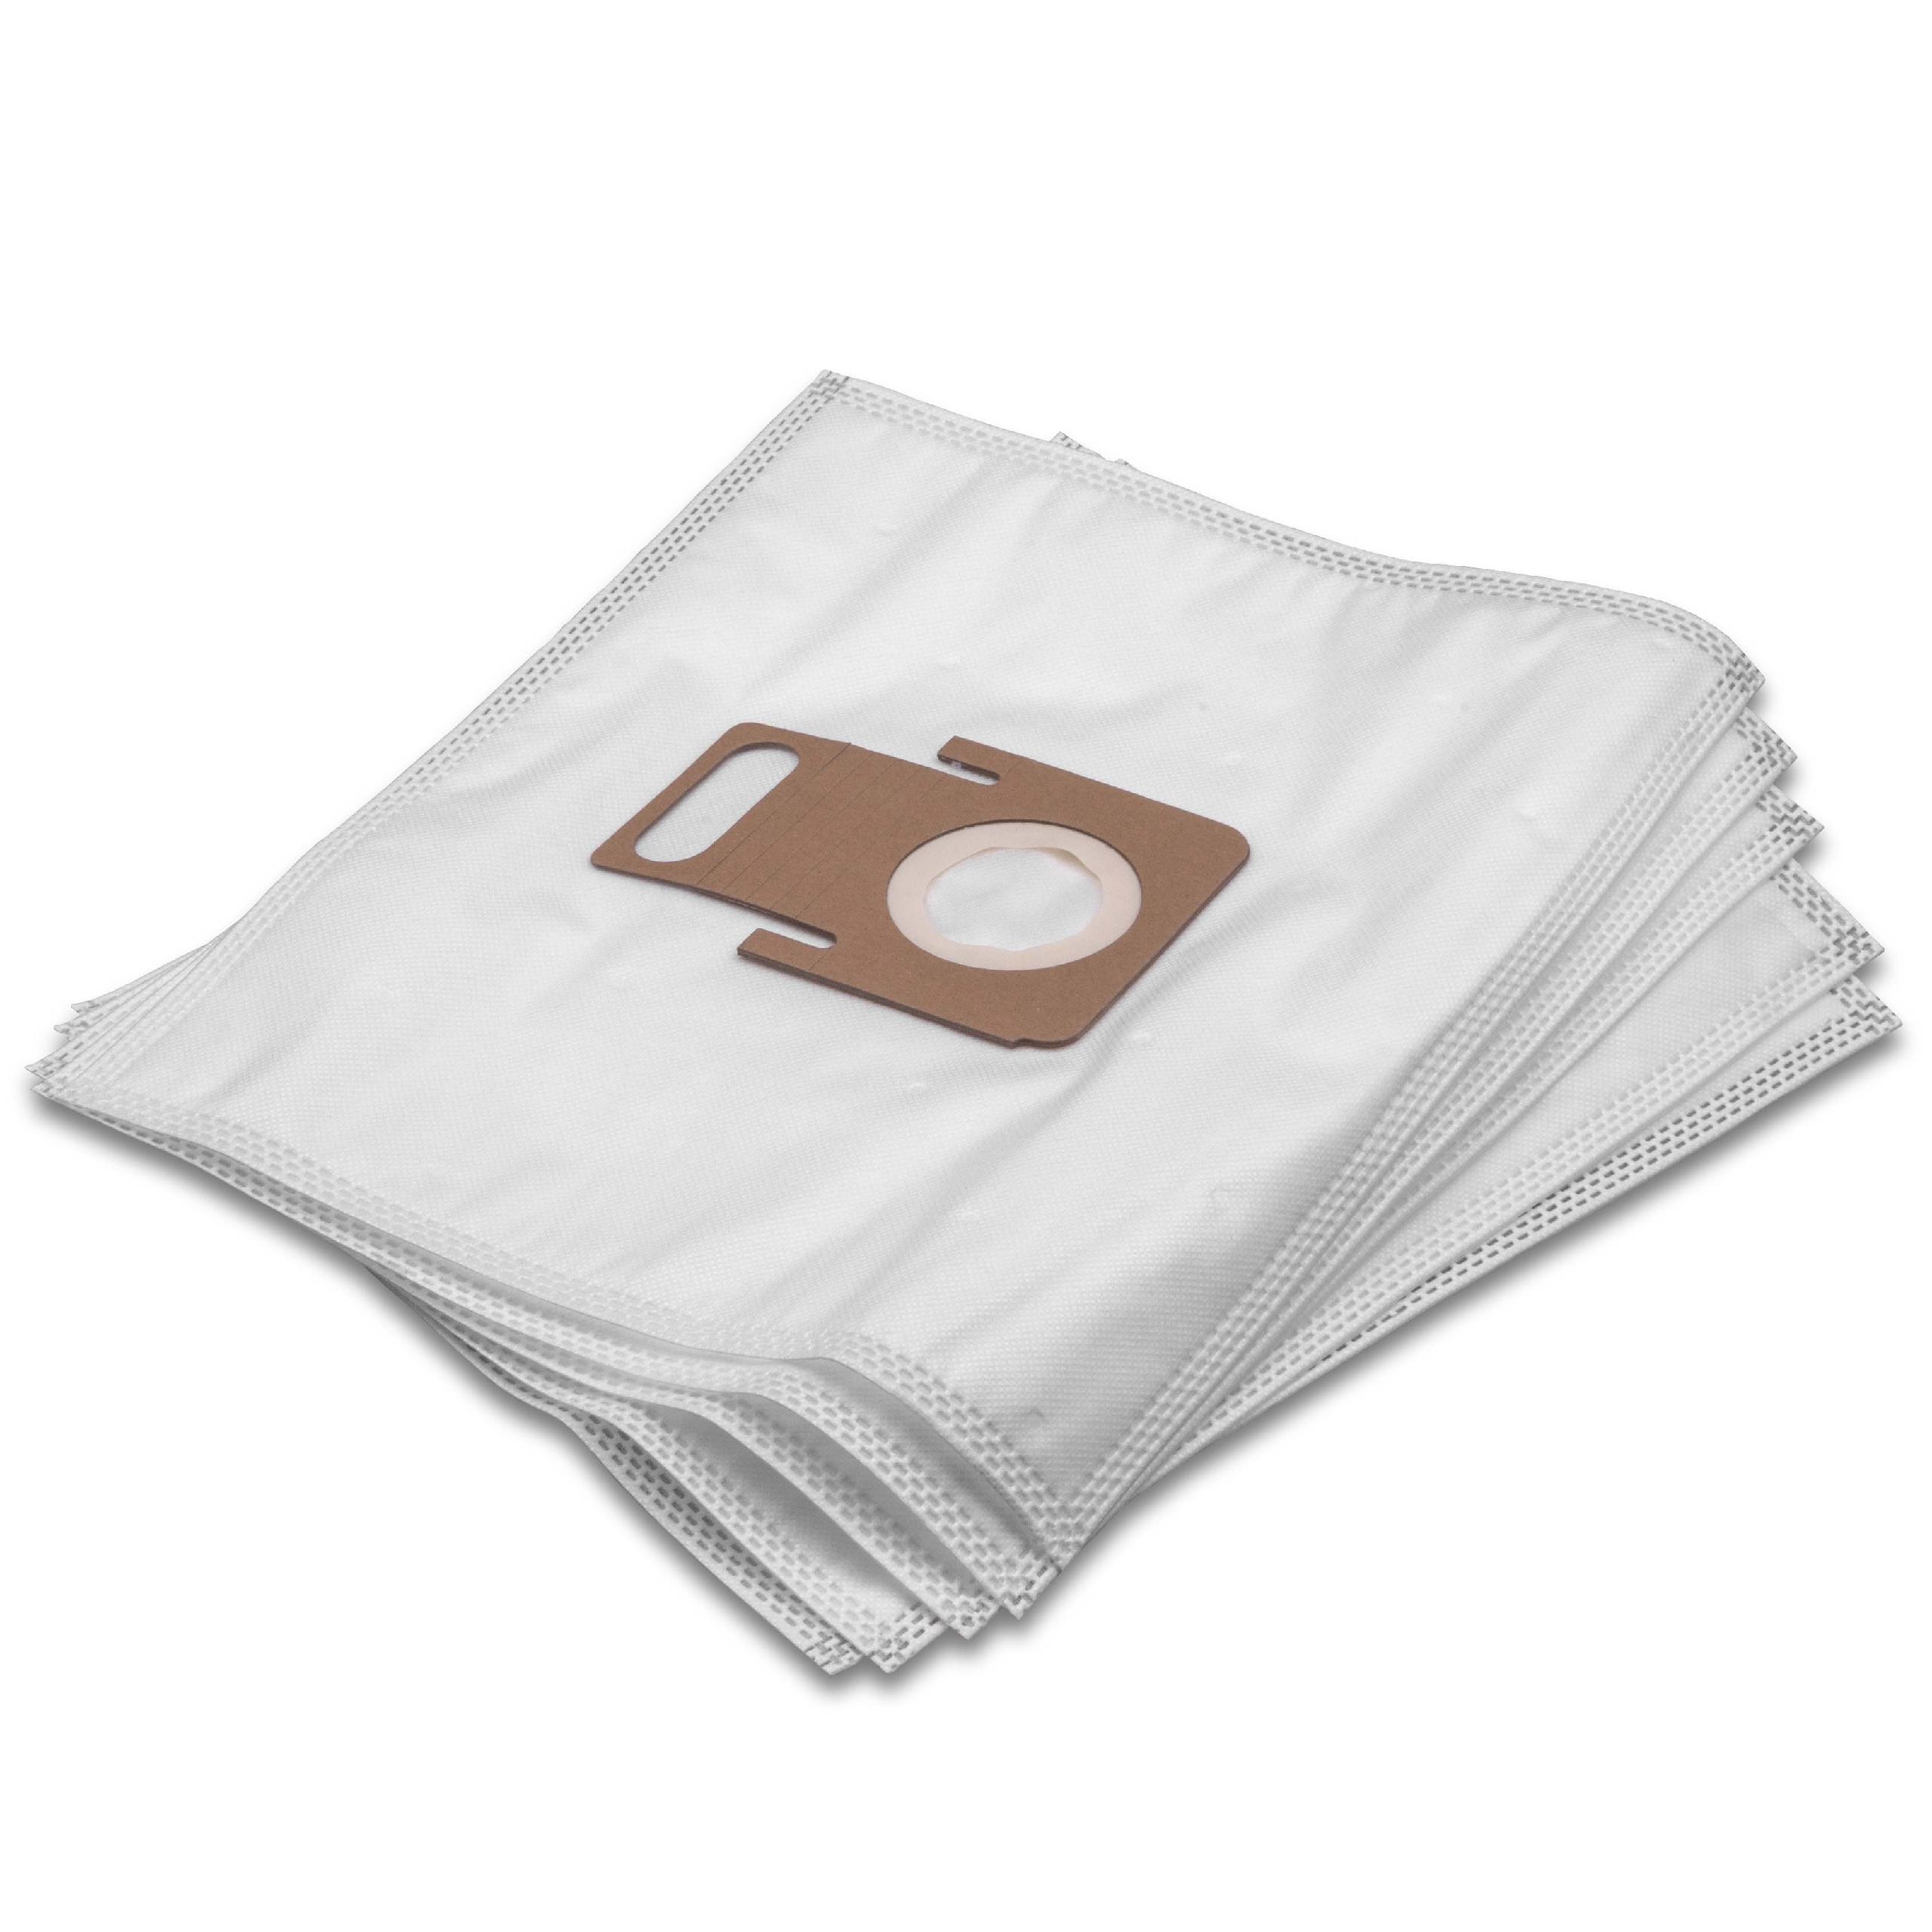 5x Vacuum Cleaner Bag replaces Thomas 787243 for Thomas - microfleece